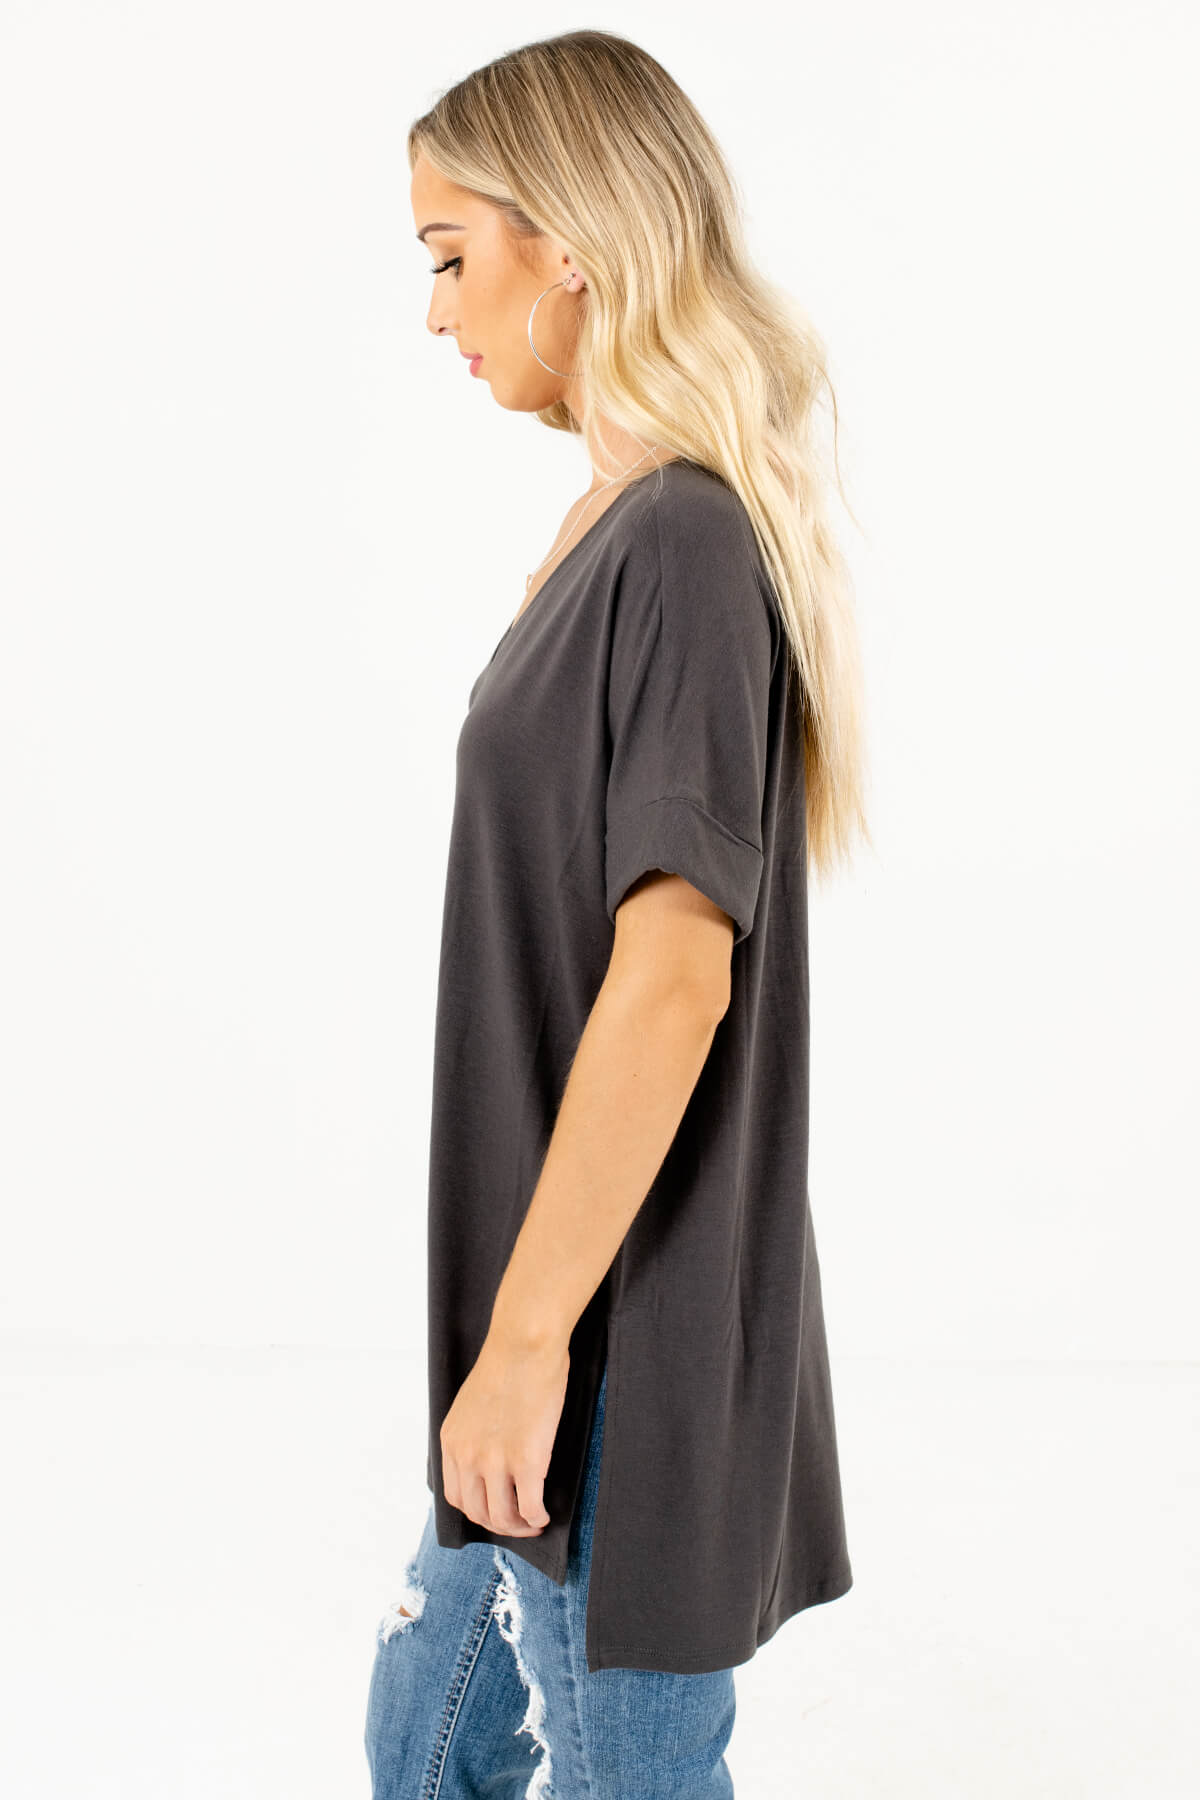 Ash Gray Layering Boutique Tops for Women